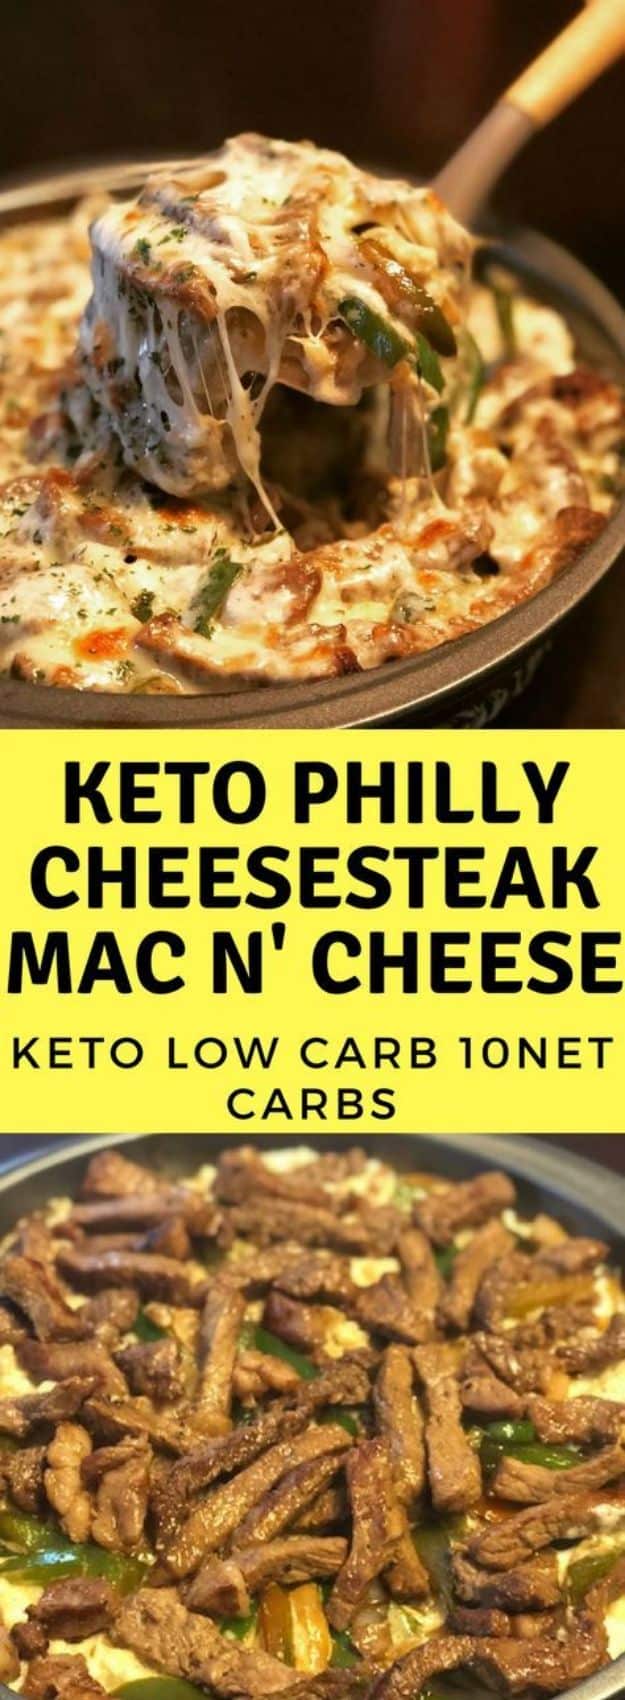 Mac and Cheese Recipes | Keto Philly Cheesesteak Mac n’ Cheese - Easy Recipe Ideas for Macaroni and Cheese - Quick Side Dishes